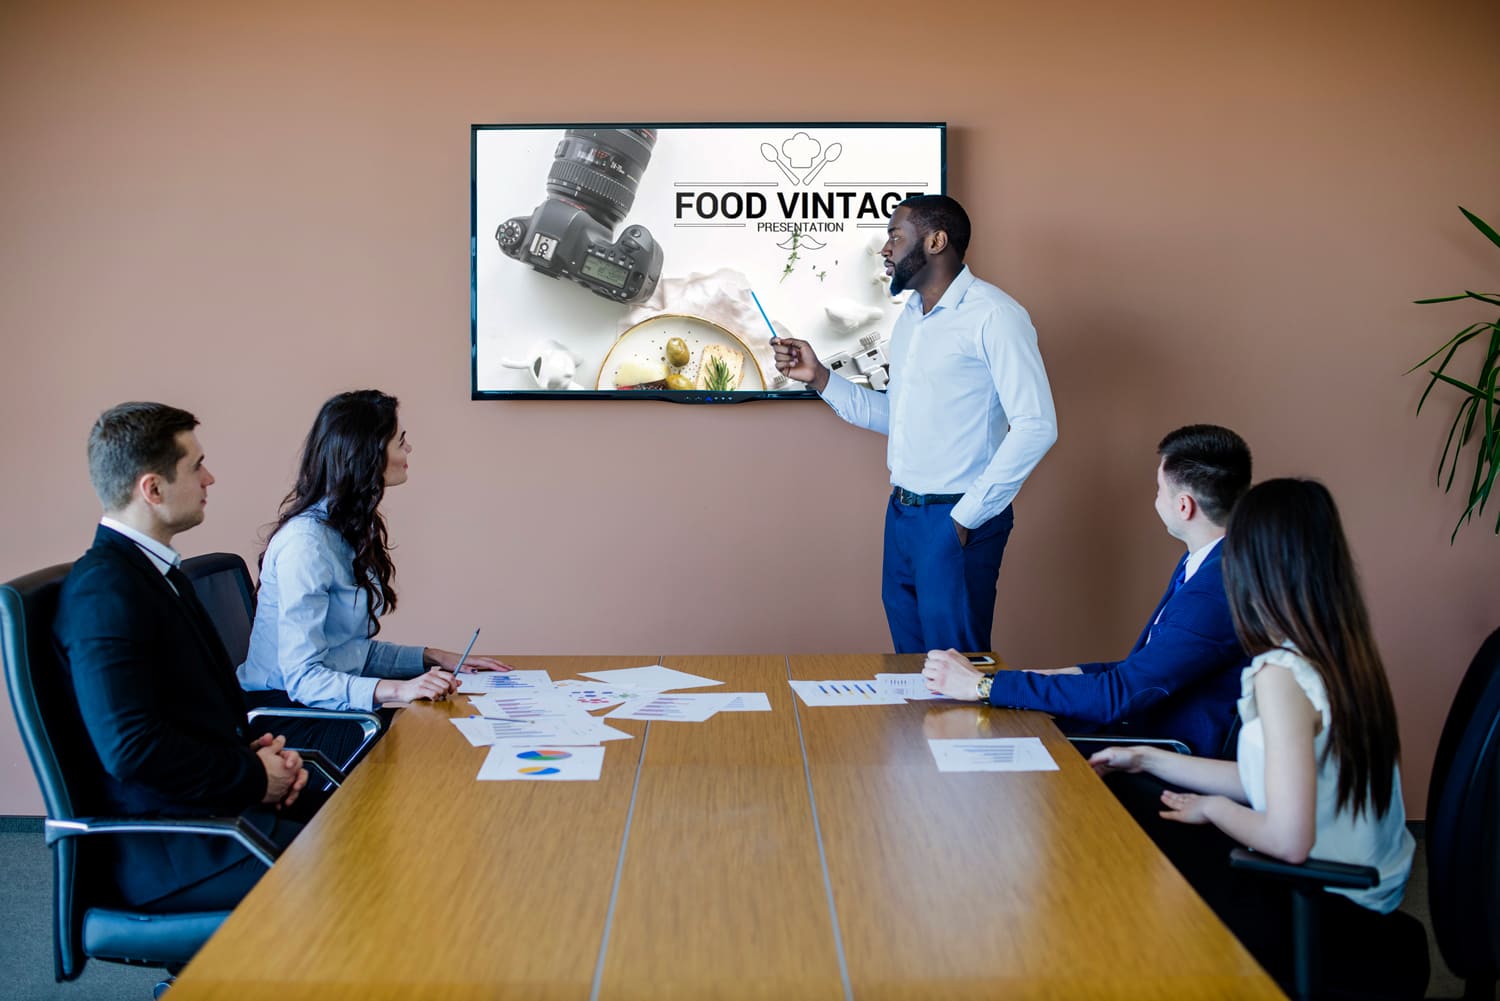 Preview Food Vintage Powerpoint Template on Screen.